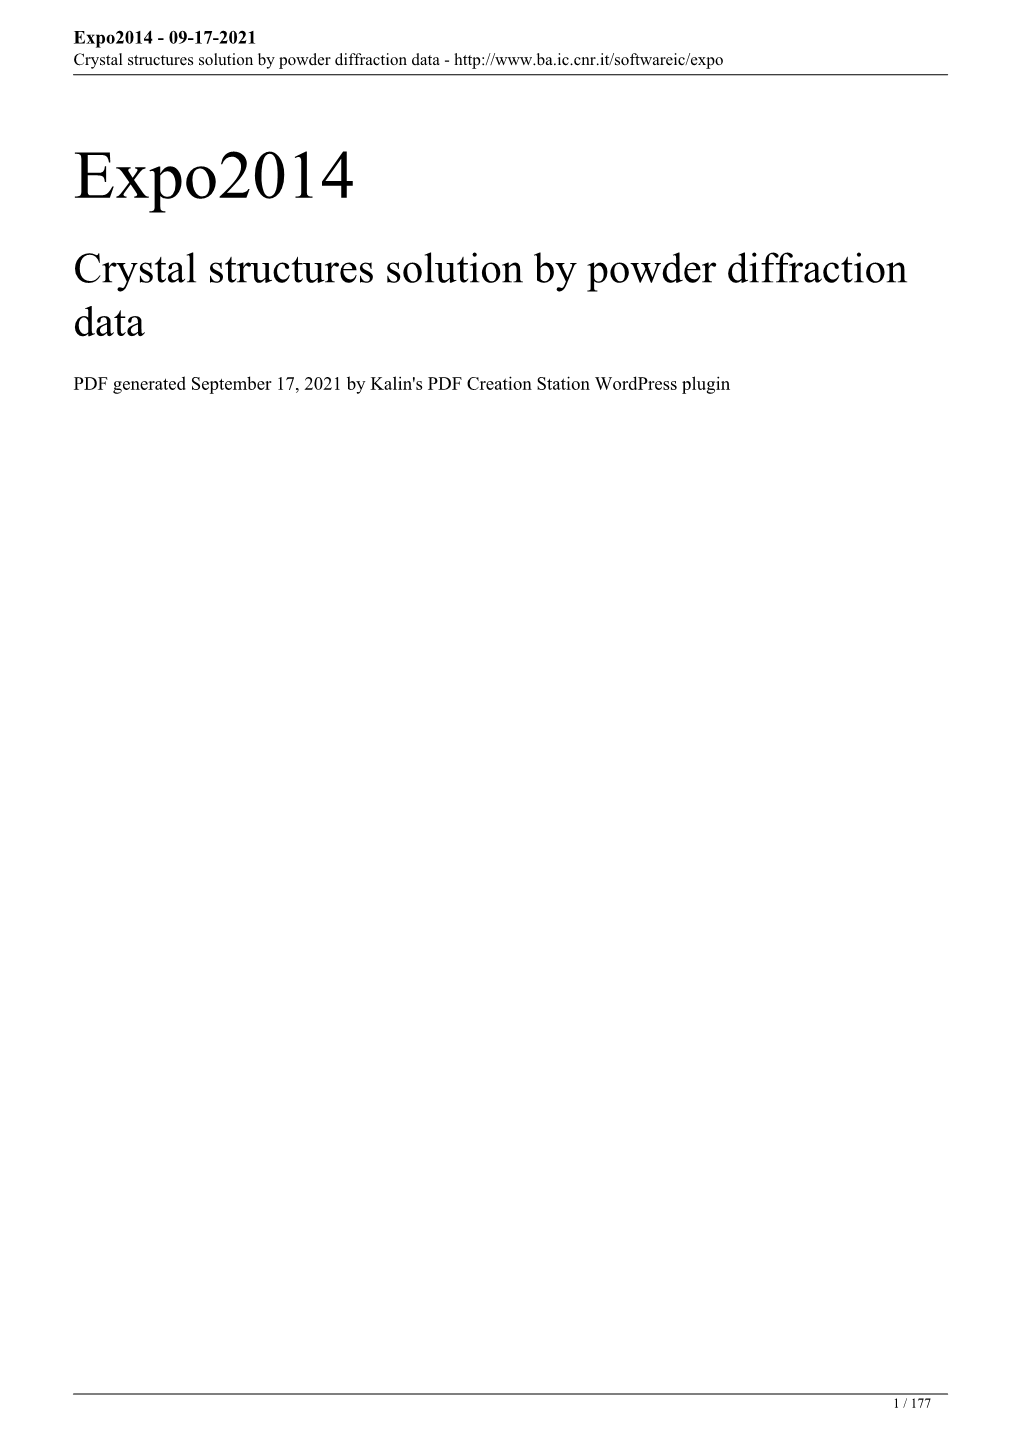 Expo2014 - 09-17-2021 Crystal Structures Solution by Powder Diffraction Data